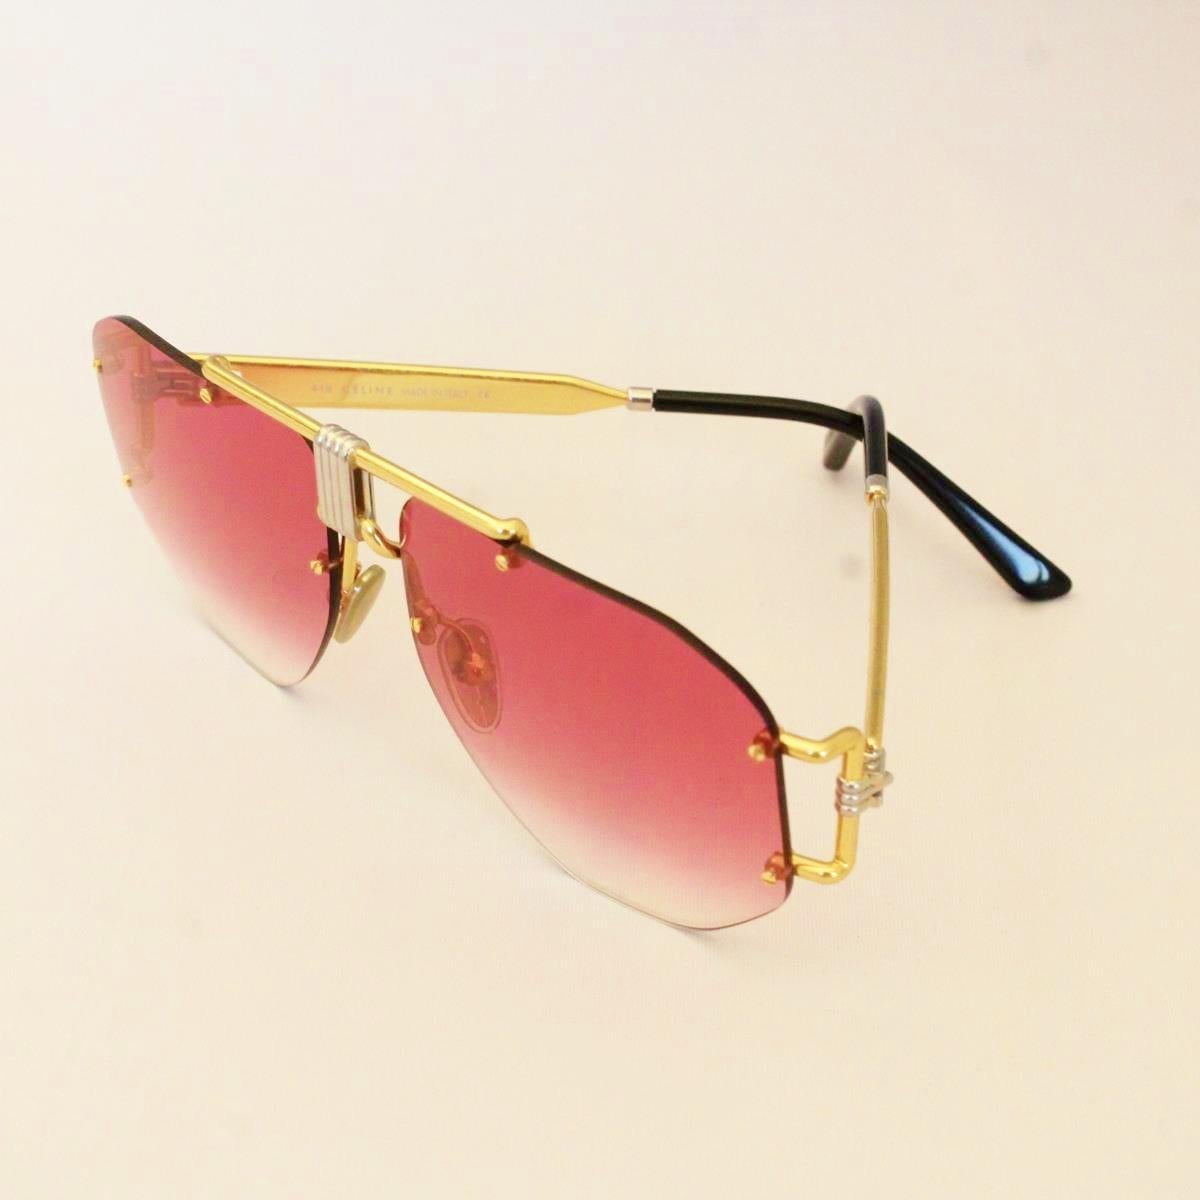 New Summer 2019 Collection
Brand new from boutique, with case
Sunglasses
Red shades lenses
Golden frames
Length cm 14 (5.5 inches)
Available on pink coor too, on request 
Made in Italy
Worldwide express shipping included in the price !